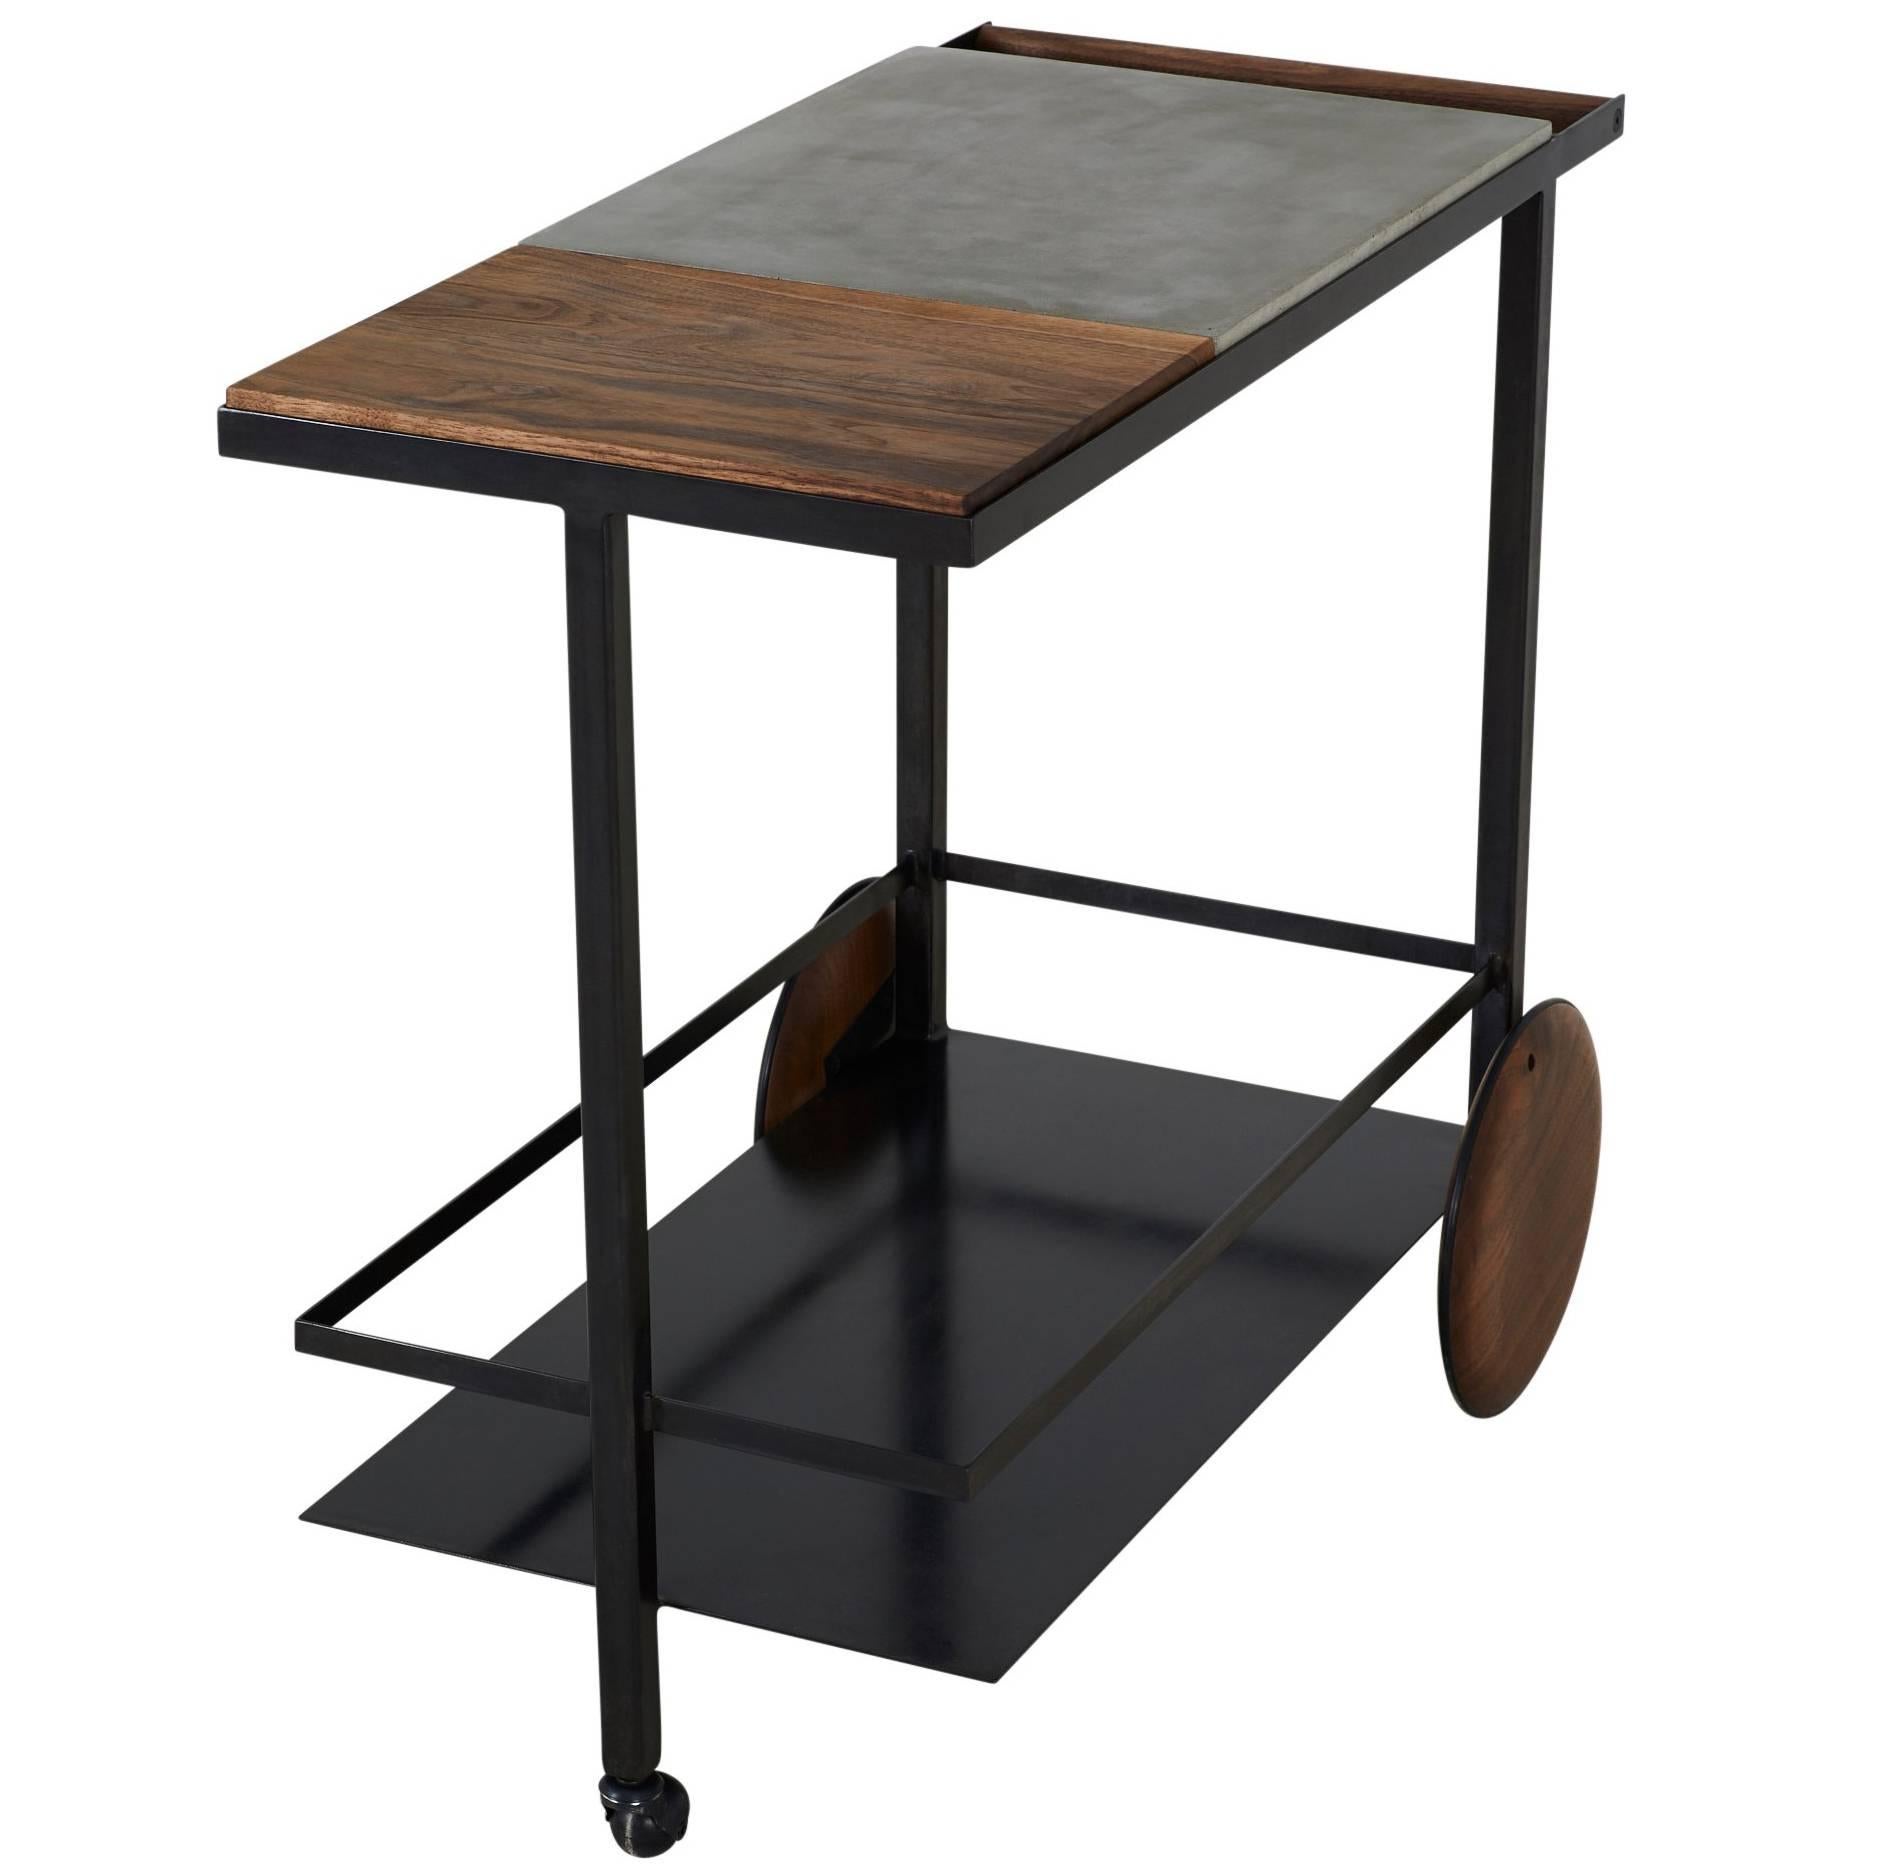 Blackened Steel, Cast-Concrete and Solid Walnut Wood Handsome Bar Cart